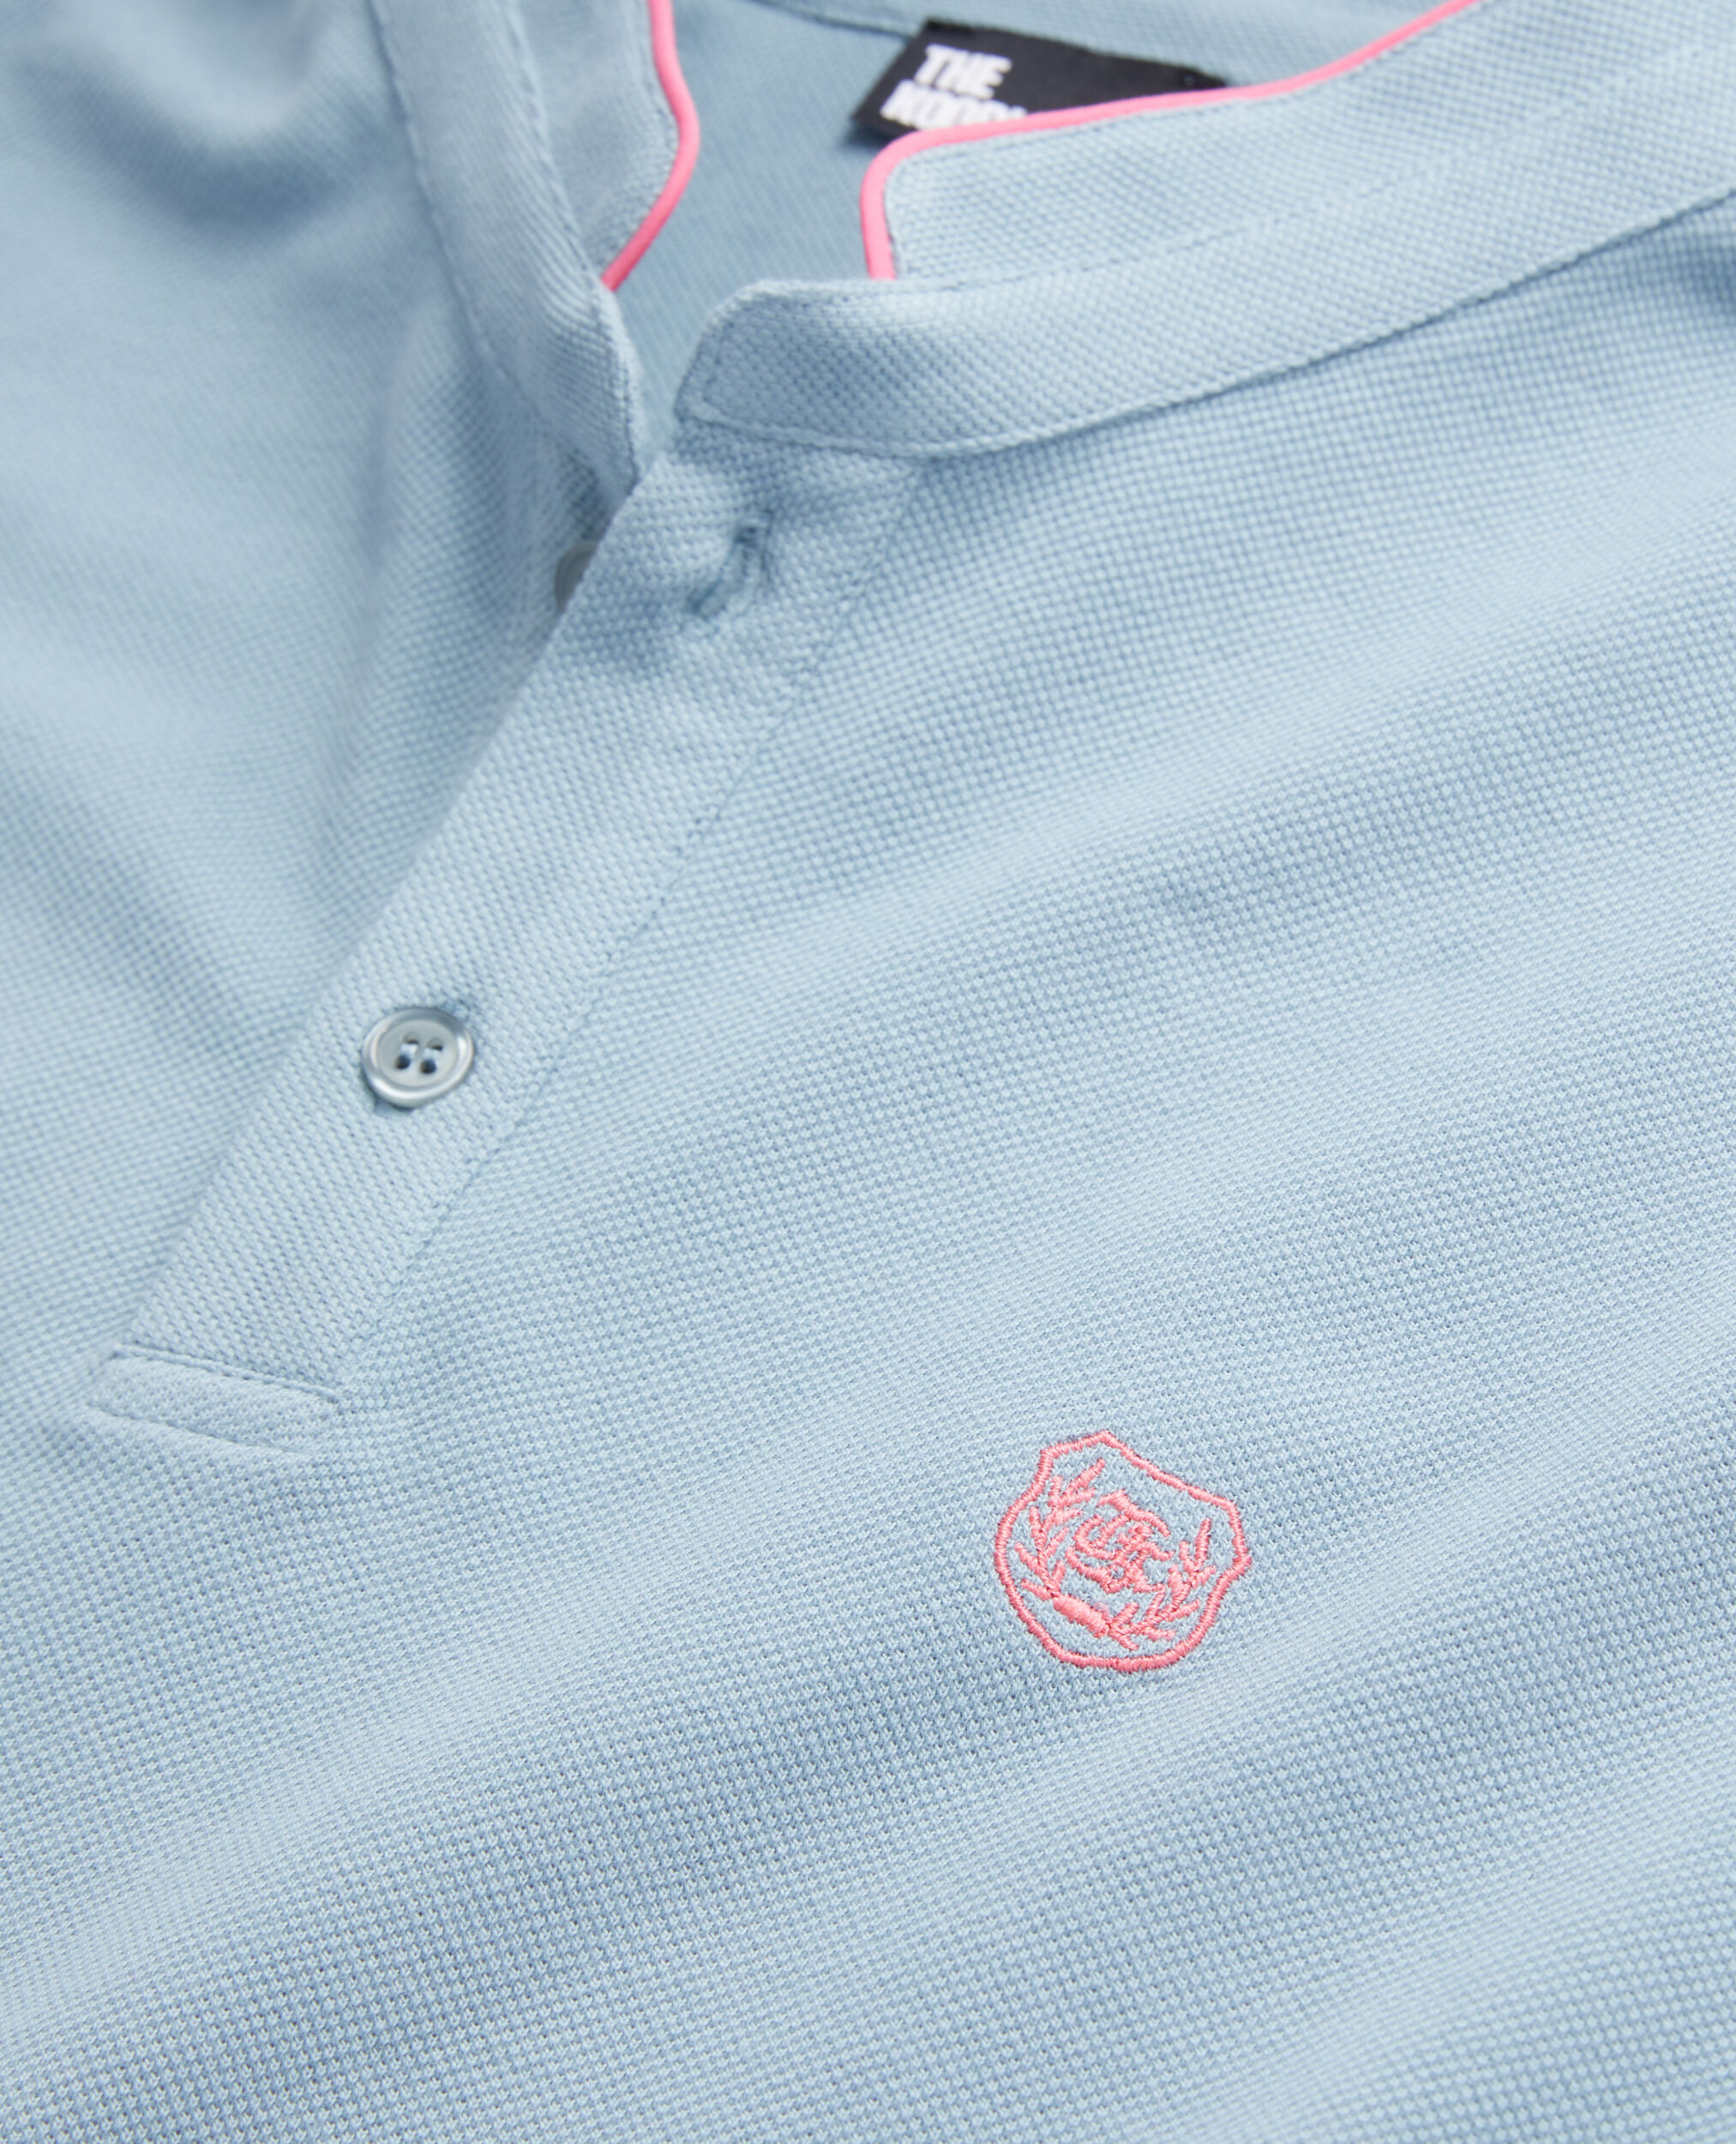 Light blue cotton polo t-shirt, BLUE GREY, hi-res image number null